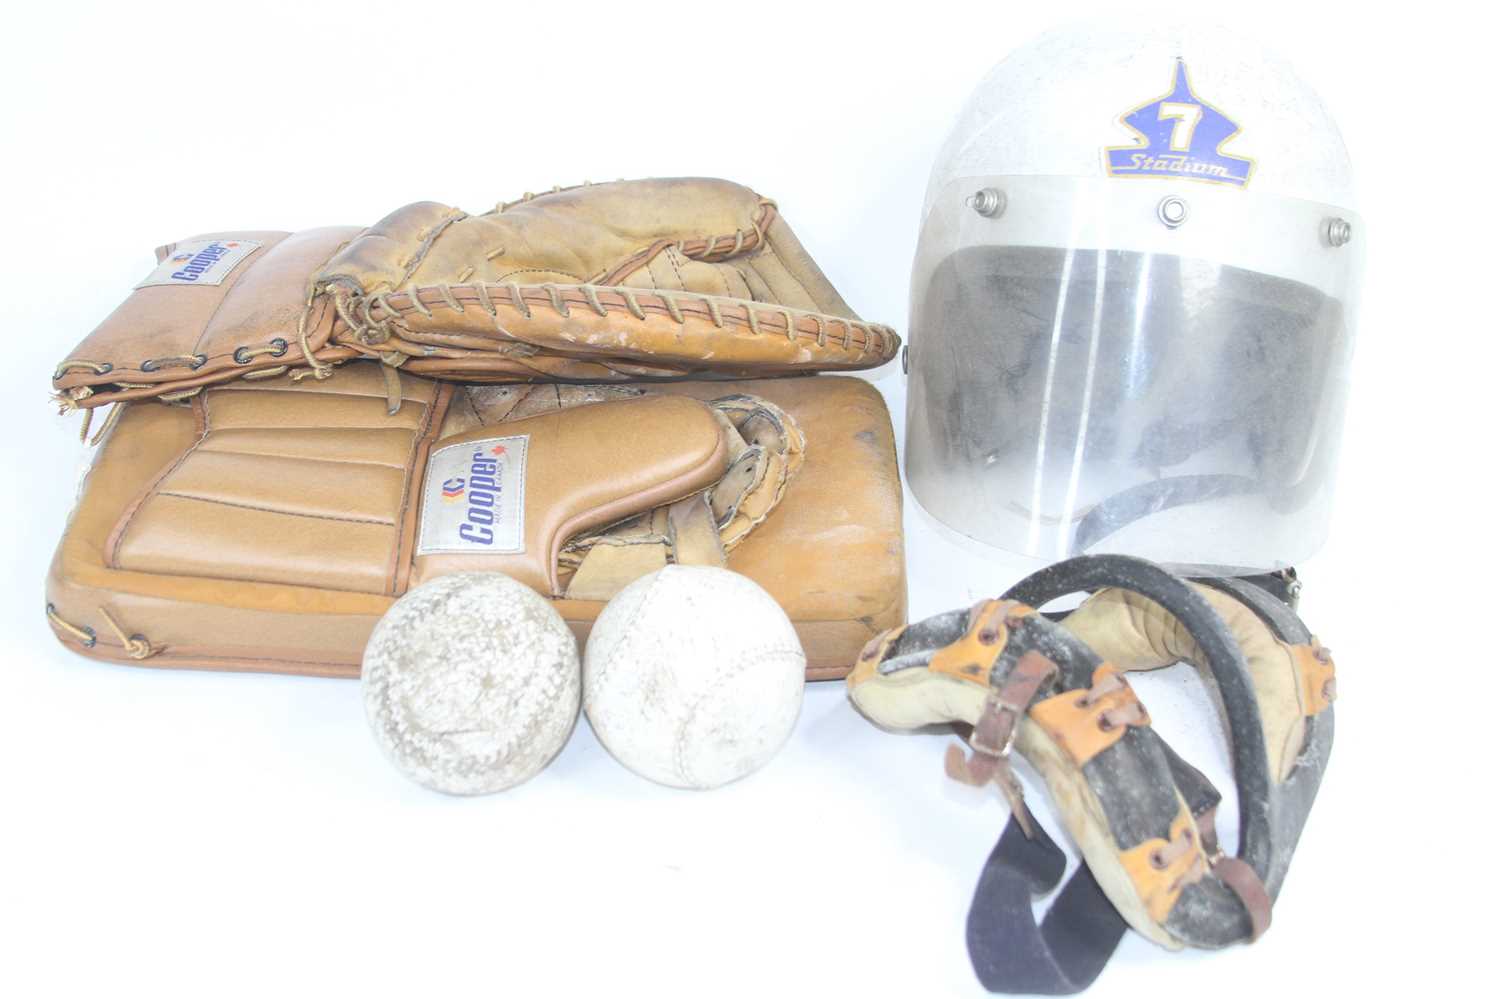 A collection of vintage baseball items